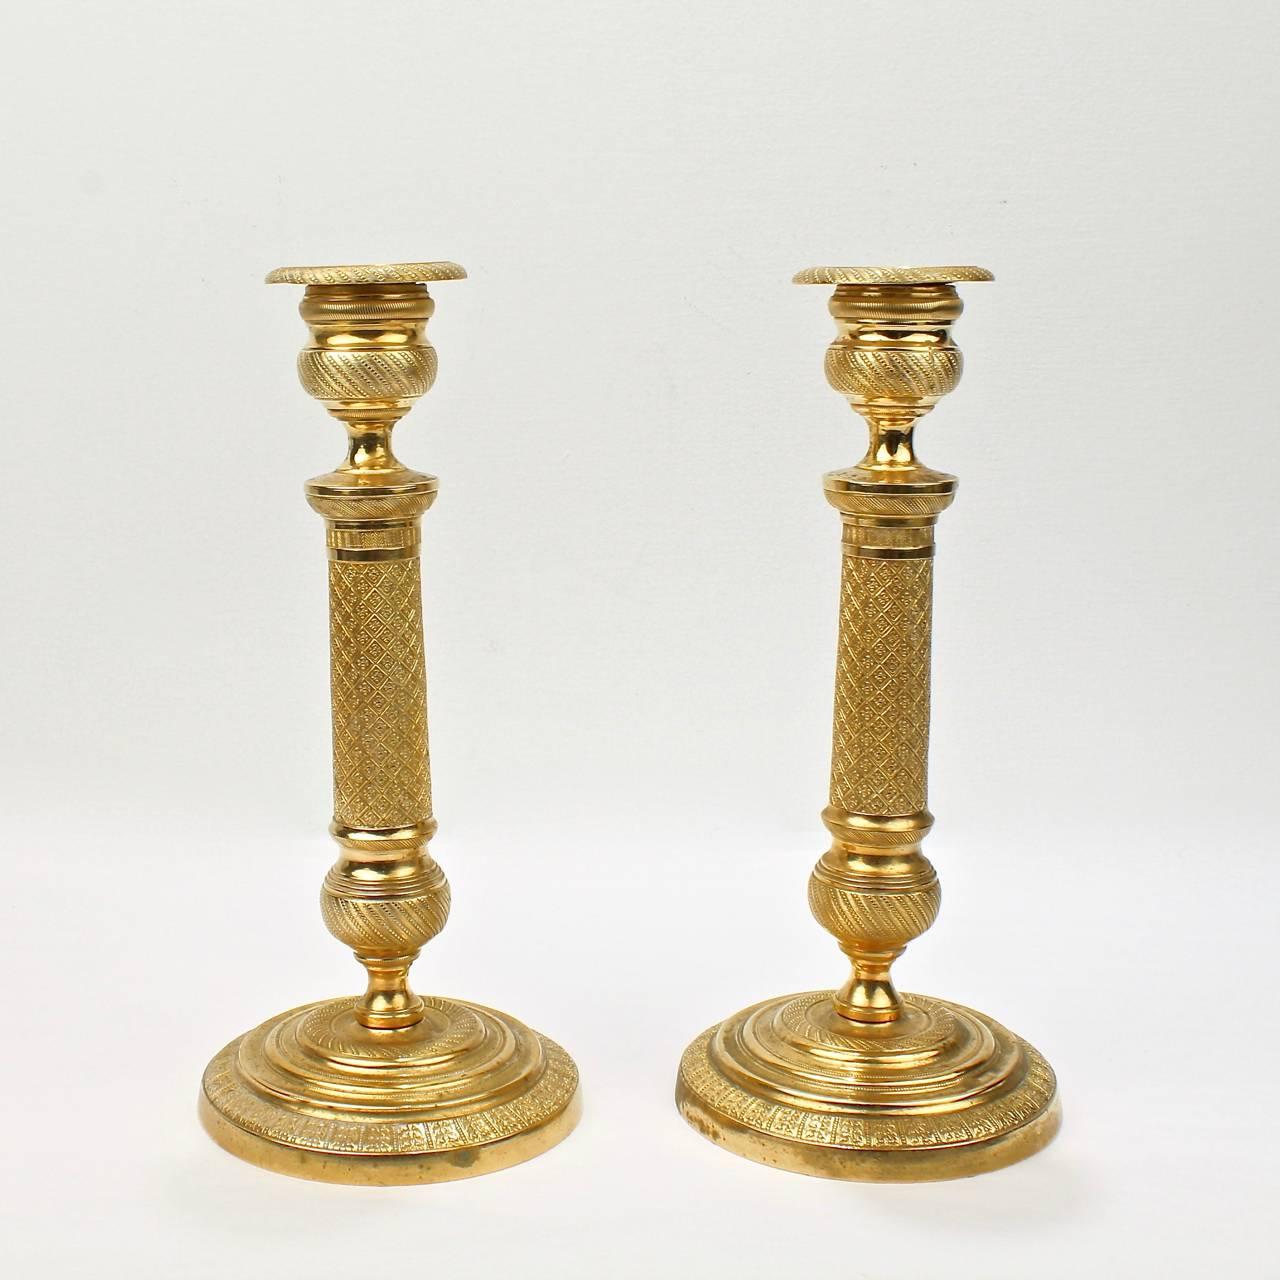 A pair of finely cast French Empire style candlesticks in doré gilt bronze.

Height: circa 9 3/4 in.

Items purchased from David Sterner antiques must delight you. Purchases may be returned for any reason for a period of 7 days.
 